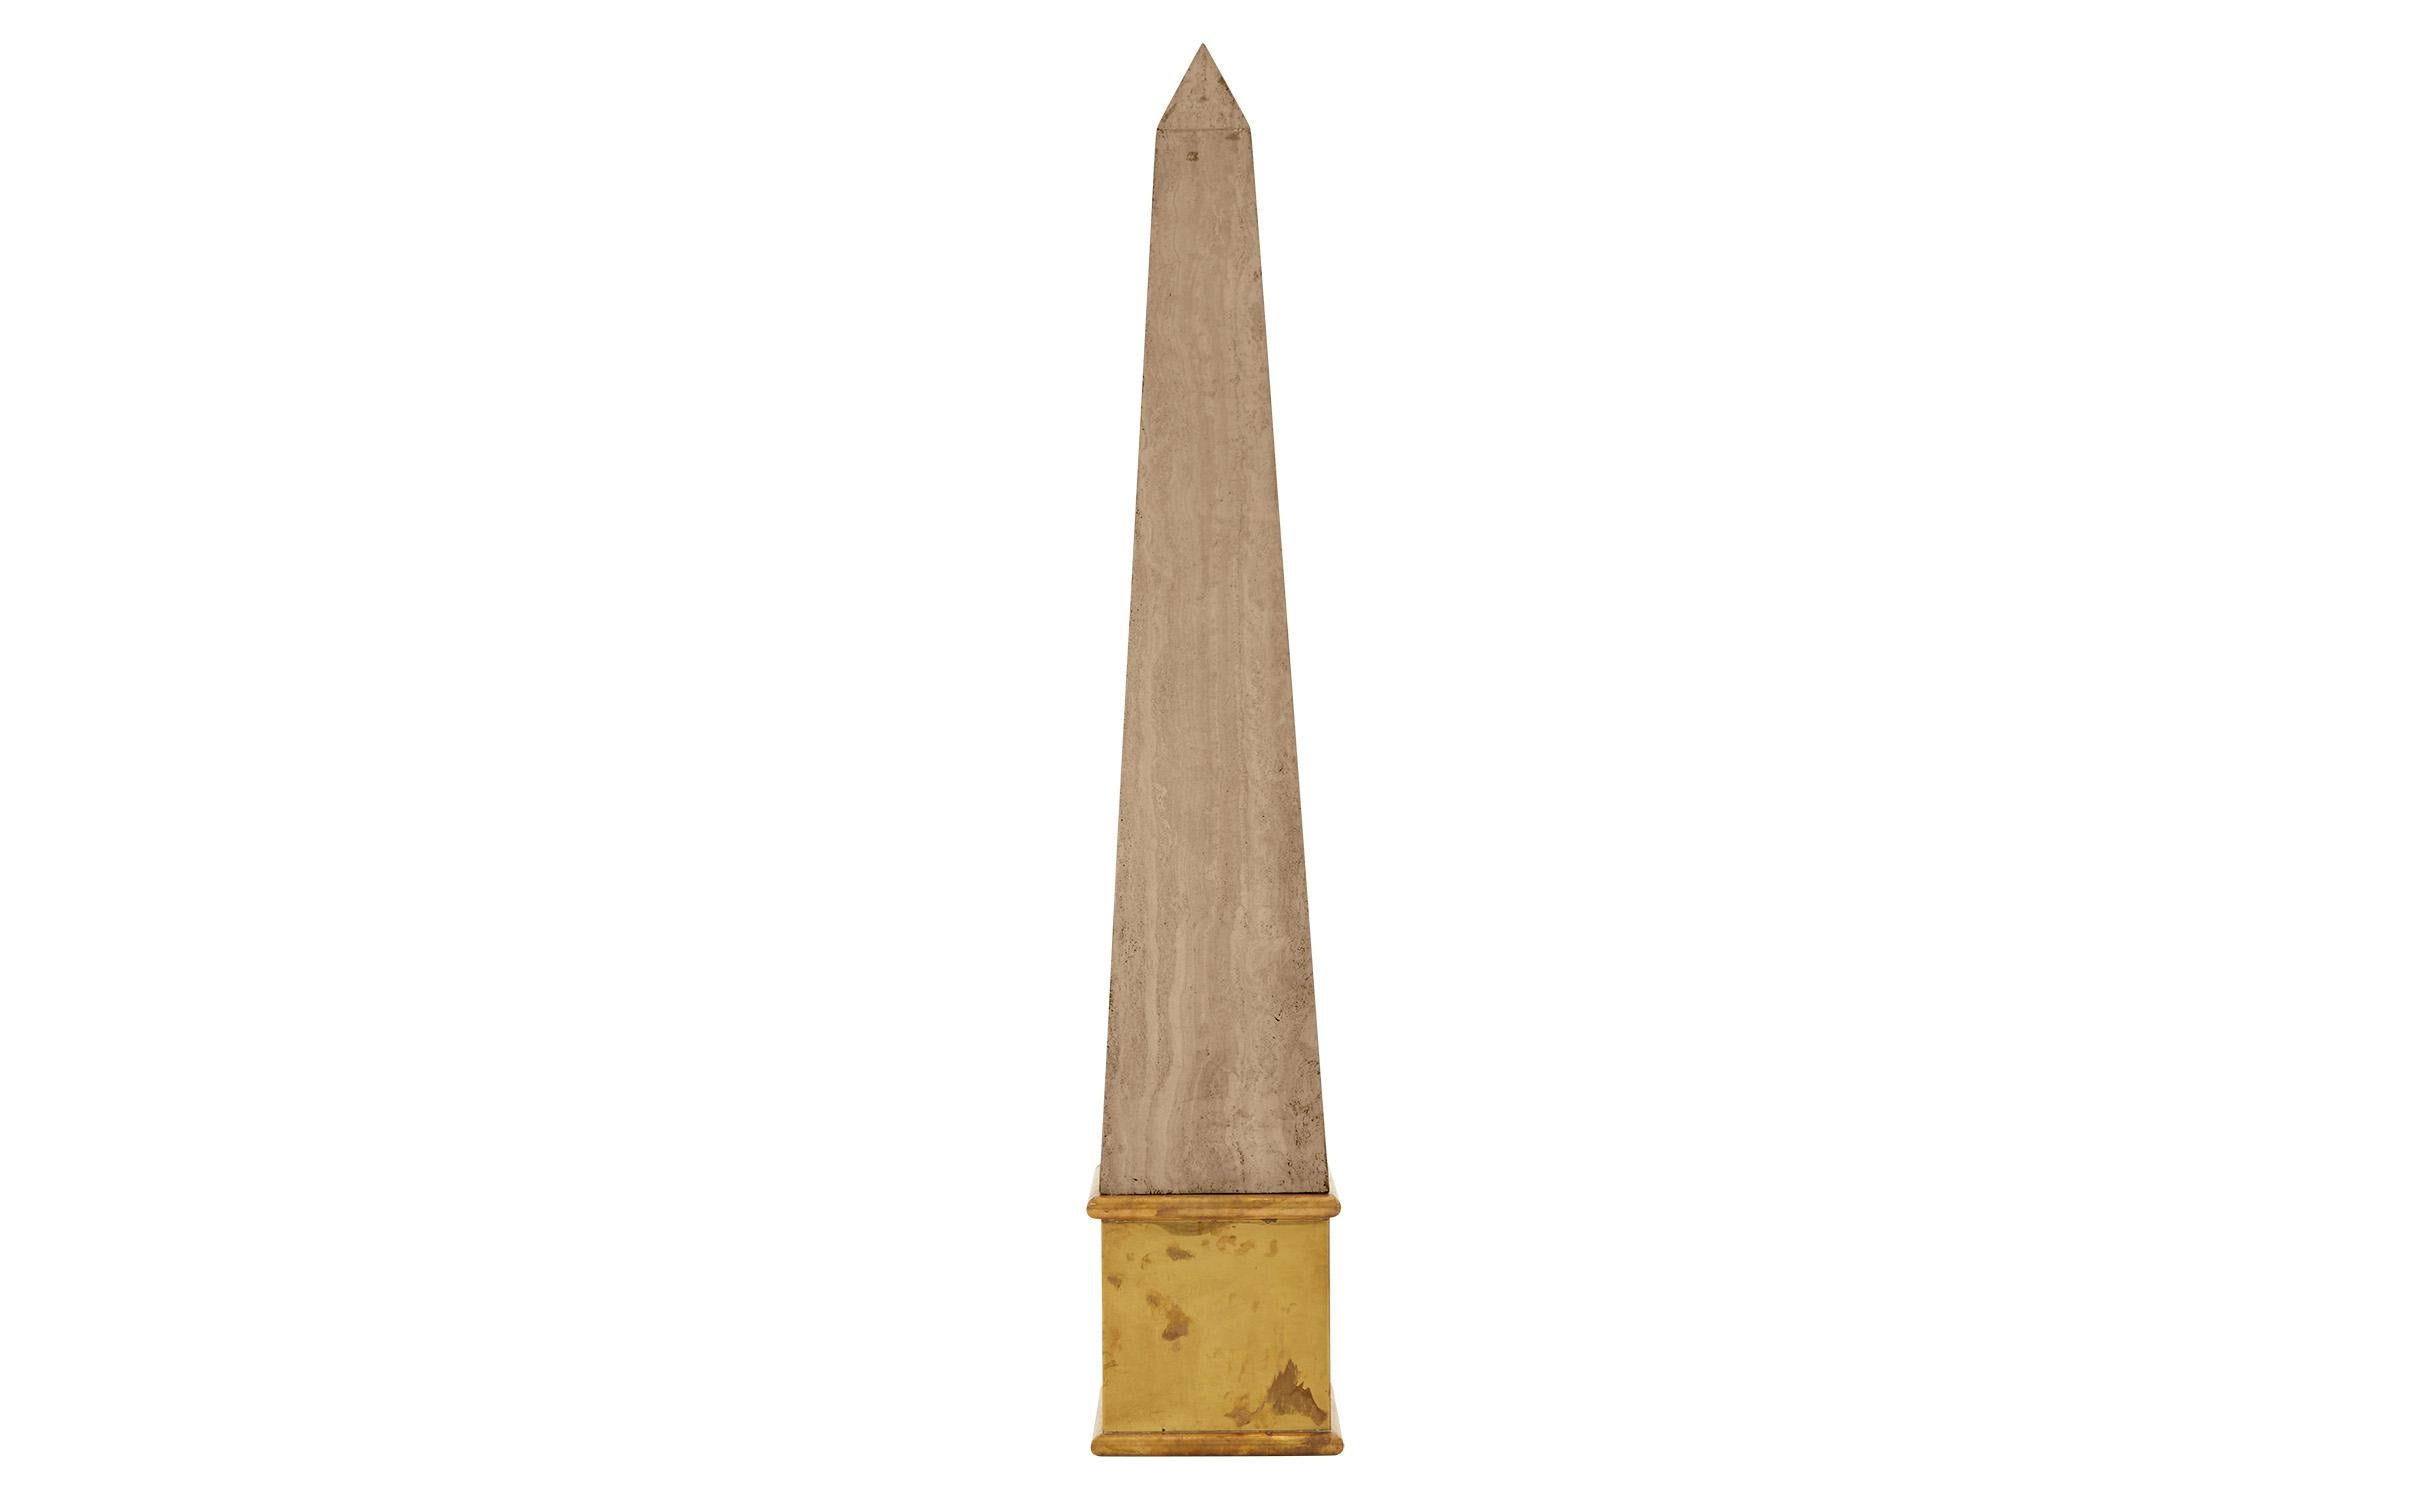 A symbol of the Sun God Ra, obelisks were a prominent element in ancient Egyptian architecture, usually placed in pairs at the entrance to temples. Made in America in the 20th century, our vintage travertine obelisk was modeled after these archaic,